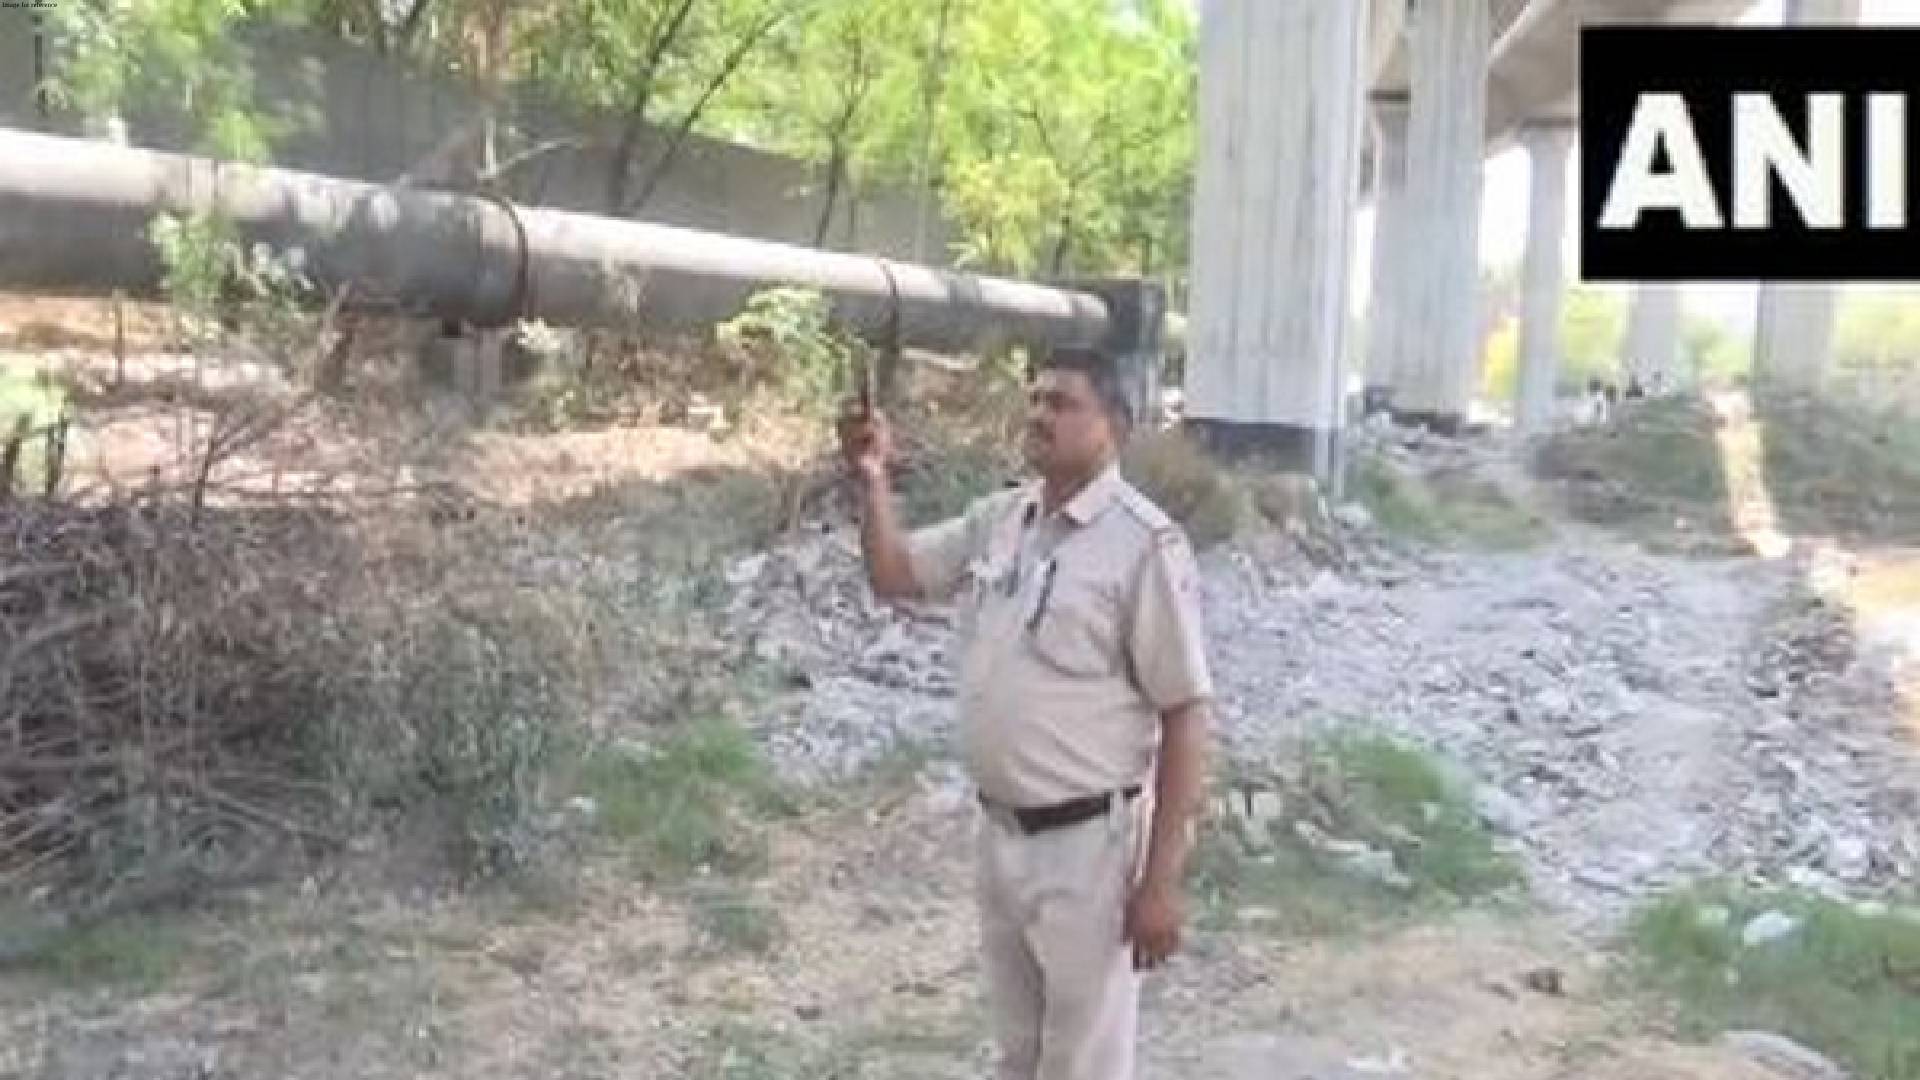 Delhi police patrol areas with Jal Board water pipelines to secure against theft, damage